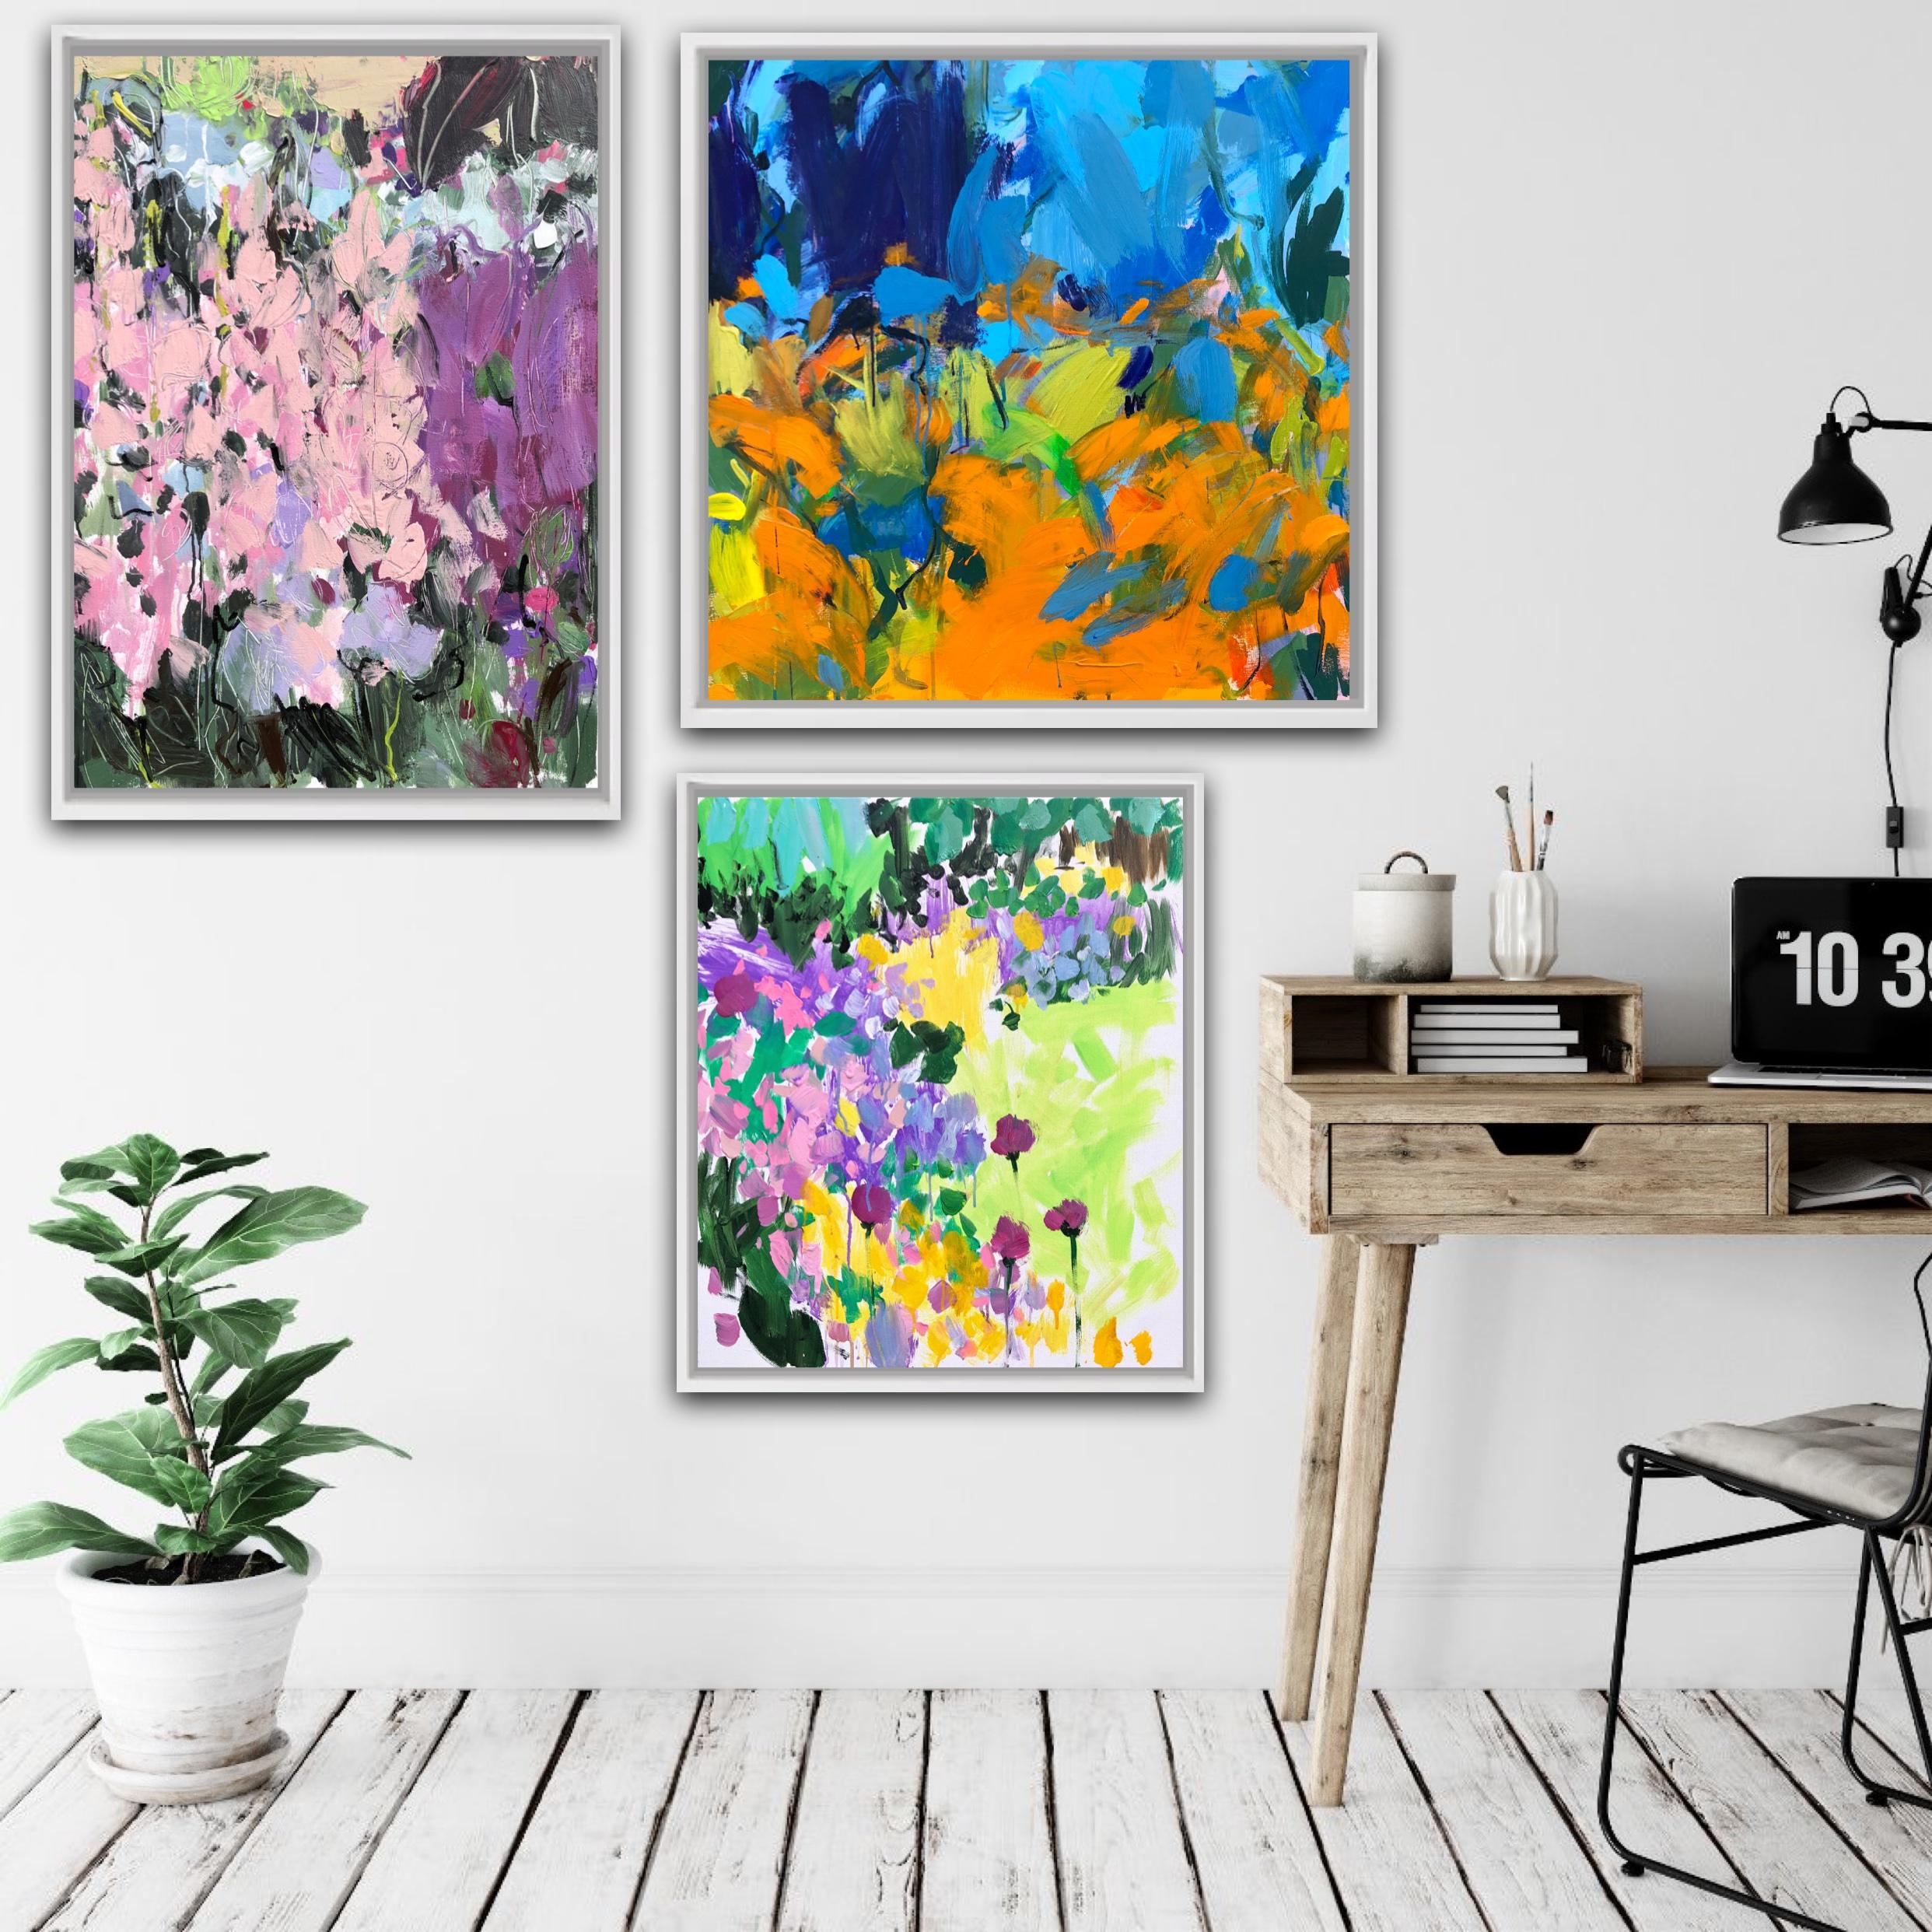 Foxgloves Flowers, After the Rain and About Fall Triptych - Abstract Painting by Sasha Getsko